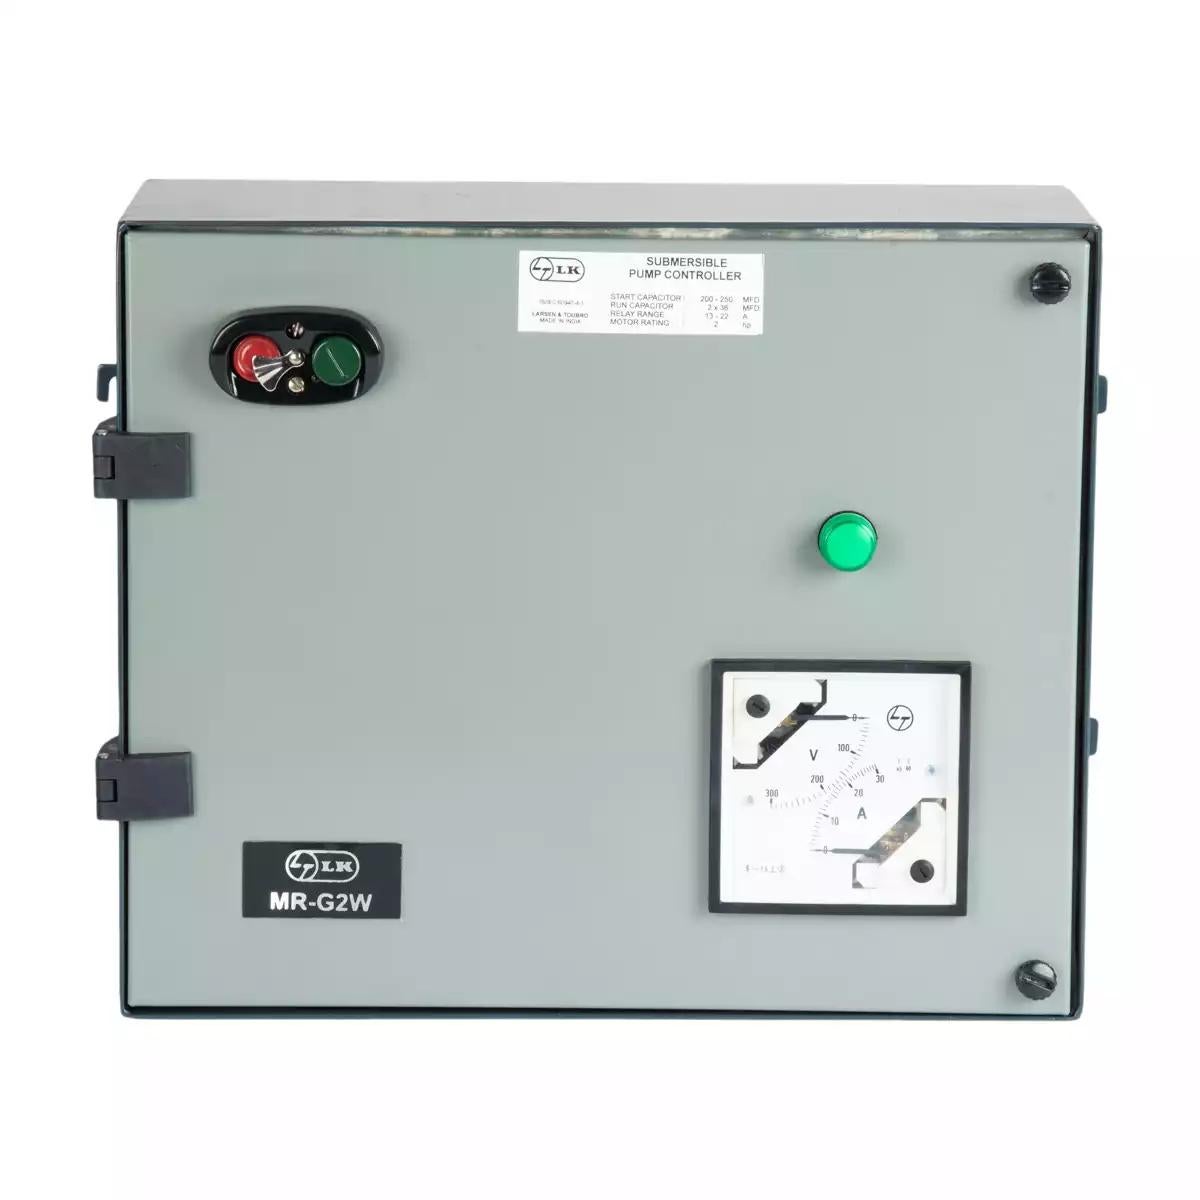 Single Phase Controller with WLC for Submersible Pump Application,MR-G2W,1HP,100 / 120mfd,1 x 36mfd (CS91041BBAE)